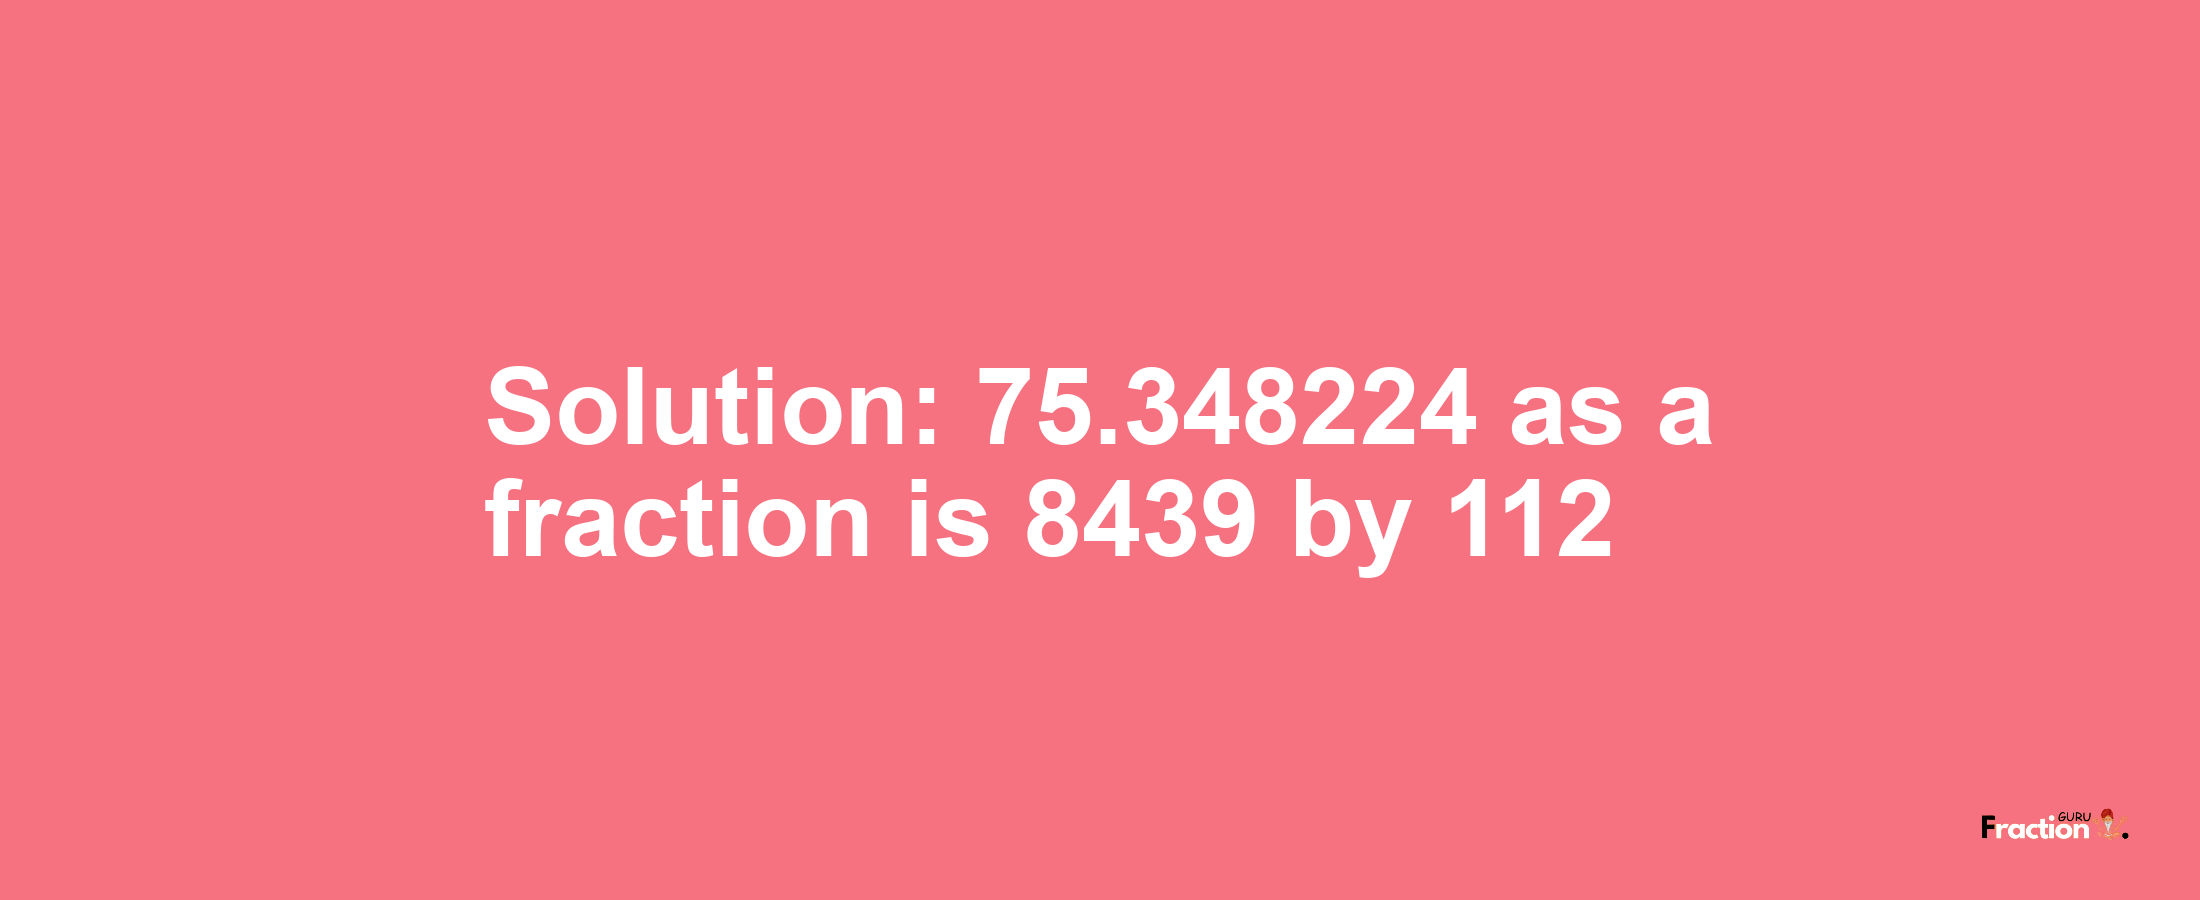 Solution:75.348224 as a fraction is 8439/112